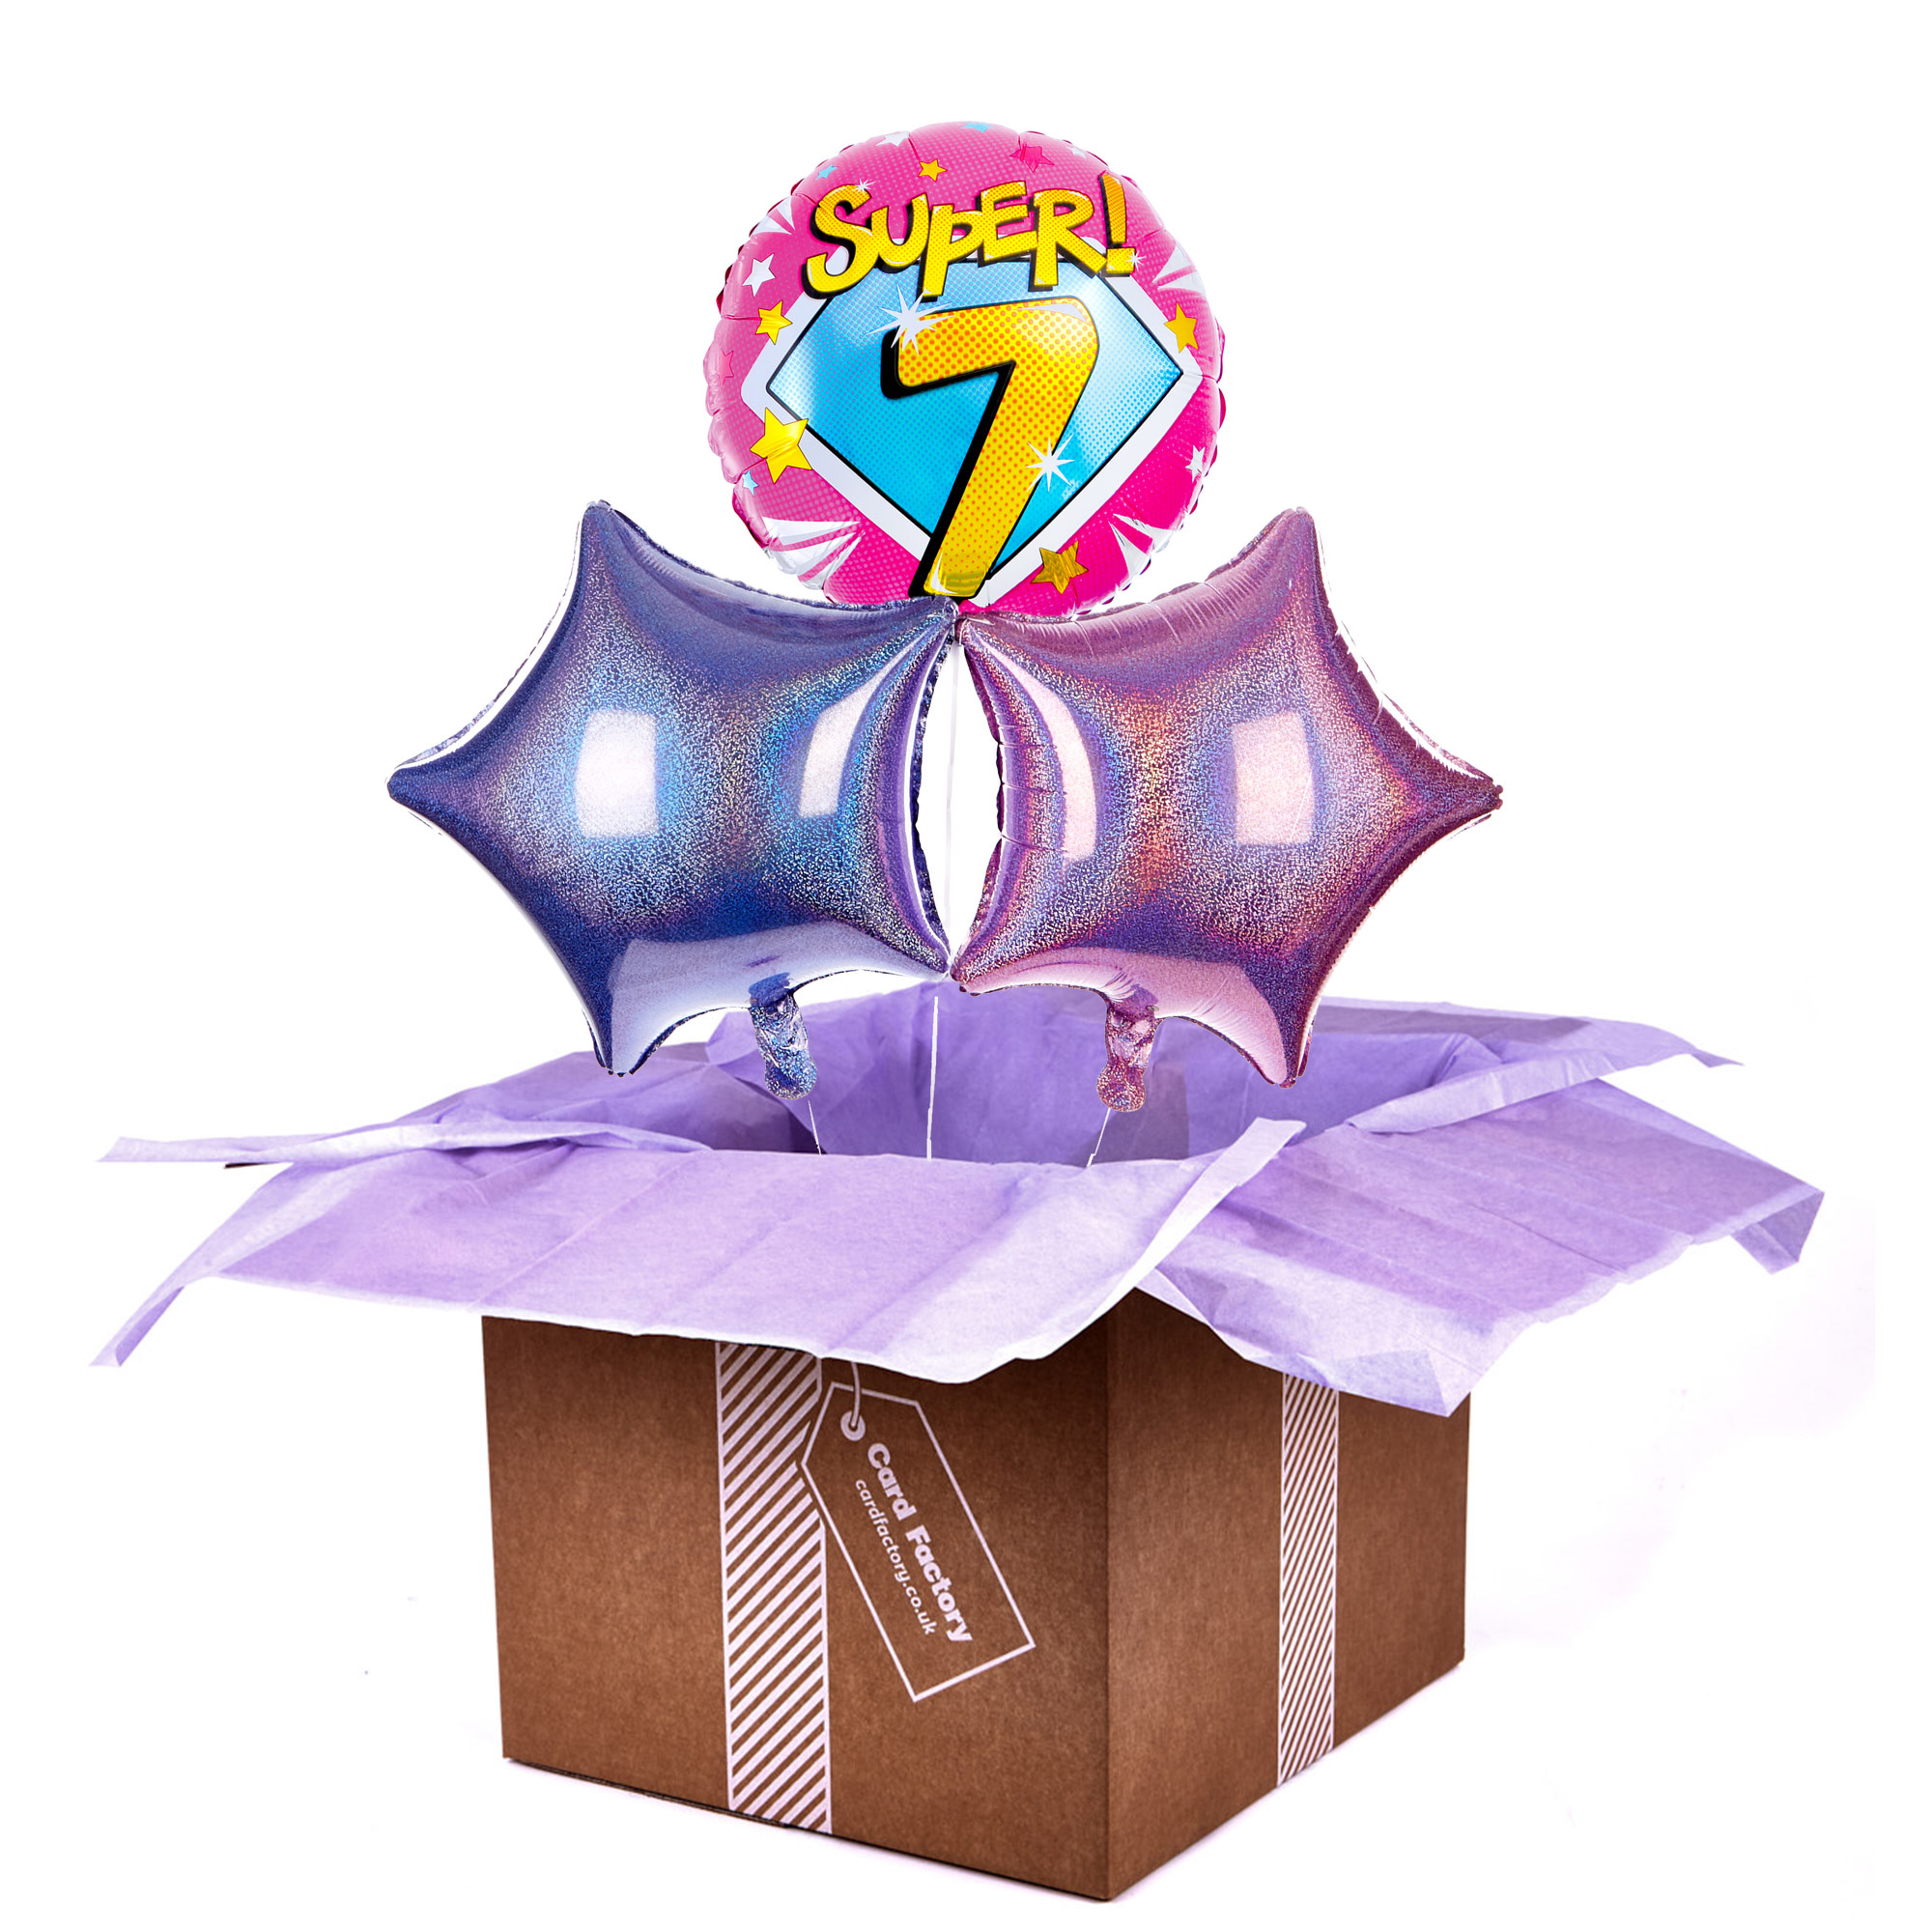 Super 7th Birthday Balloon Bouquet - DELIVERED INFLATED!